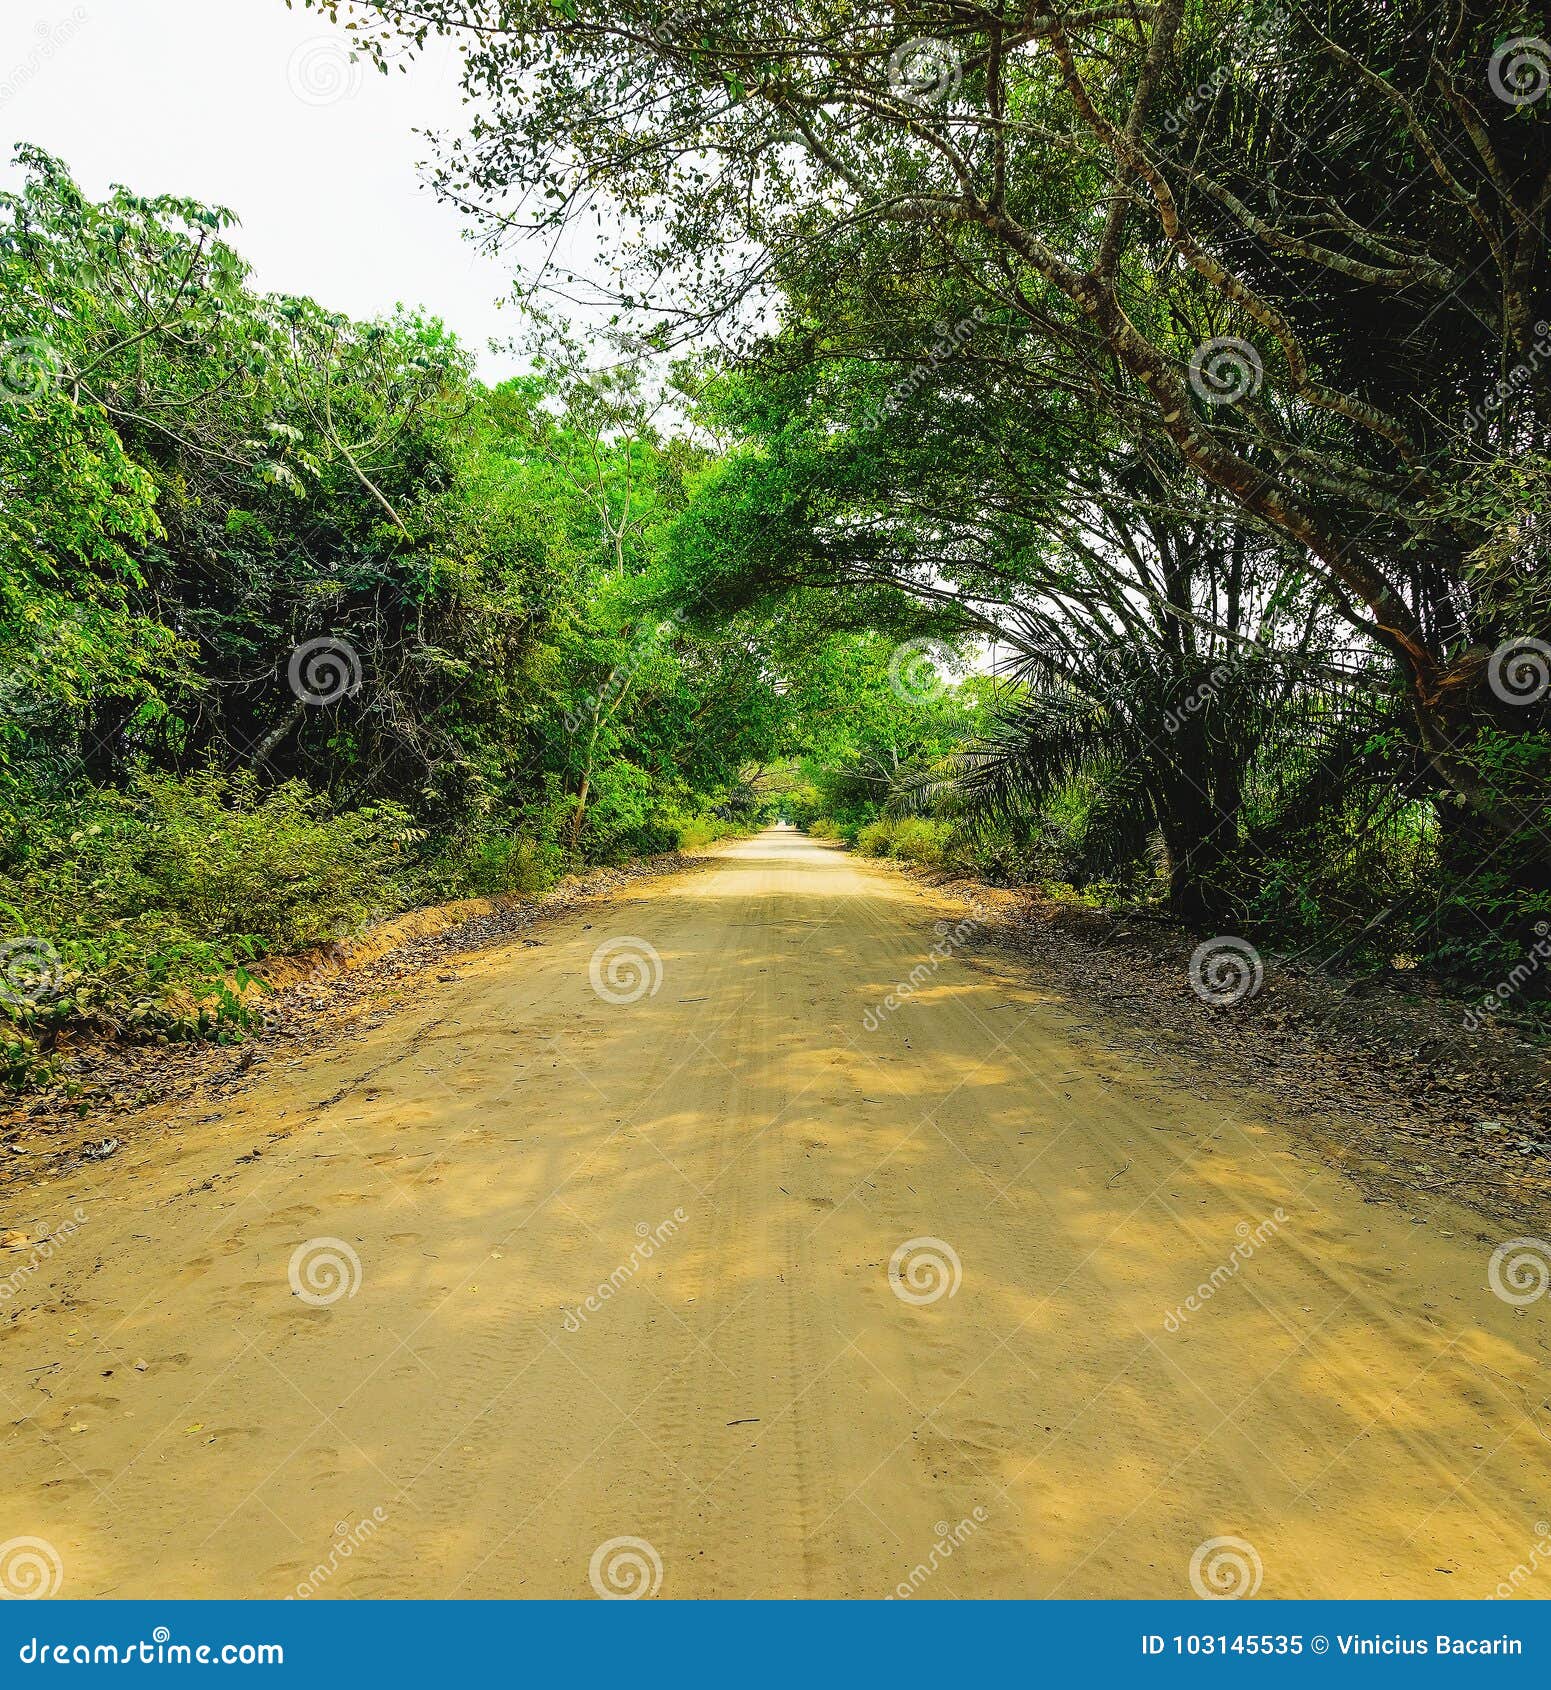 dirt road surrounded by the forest known as estrada parque do pa